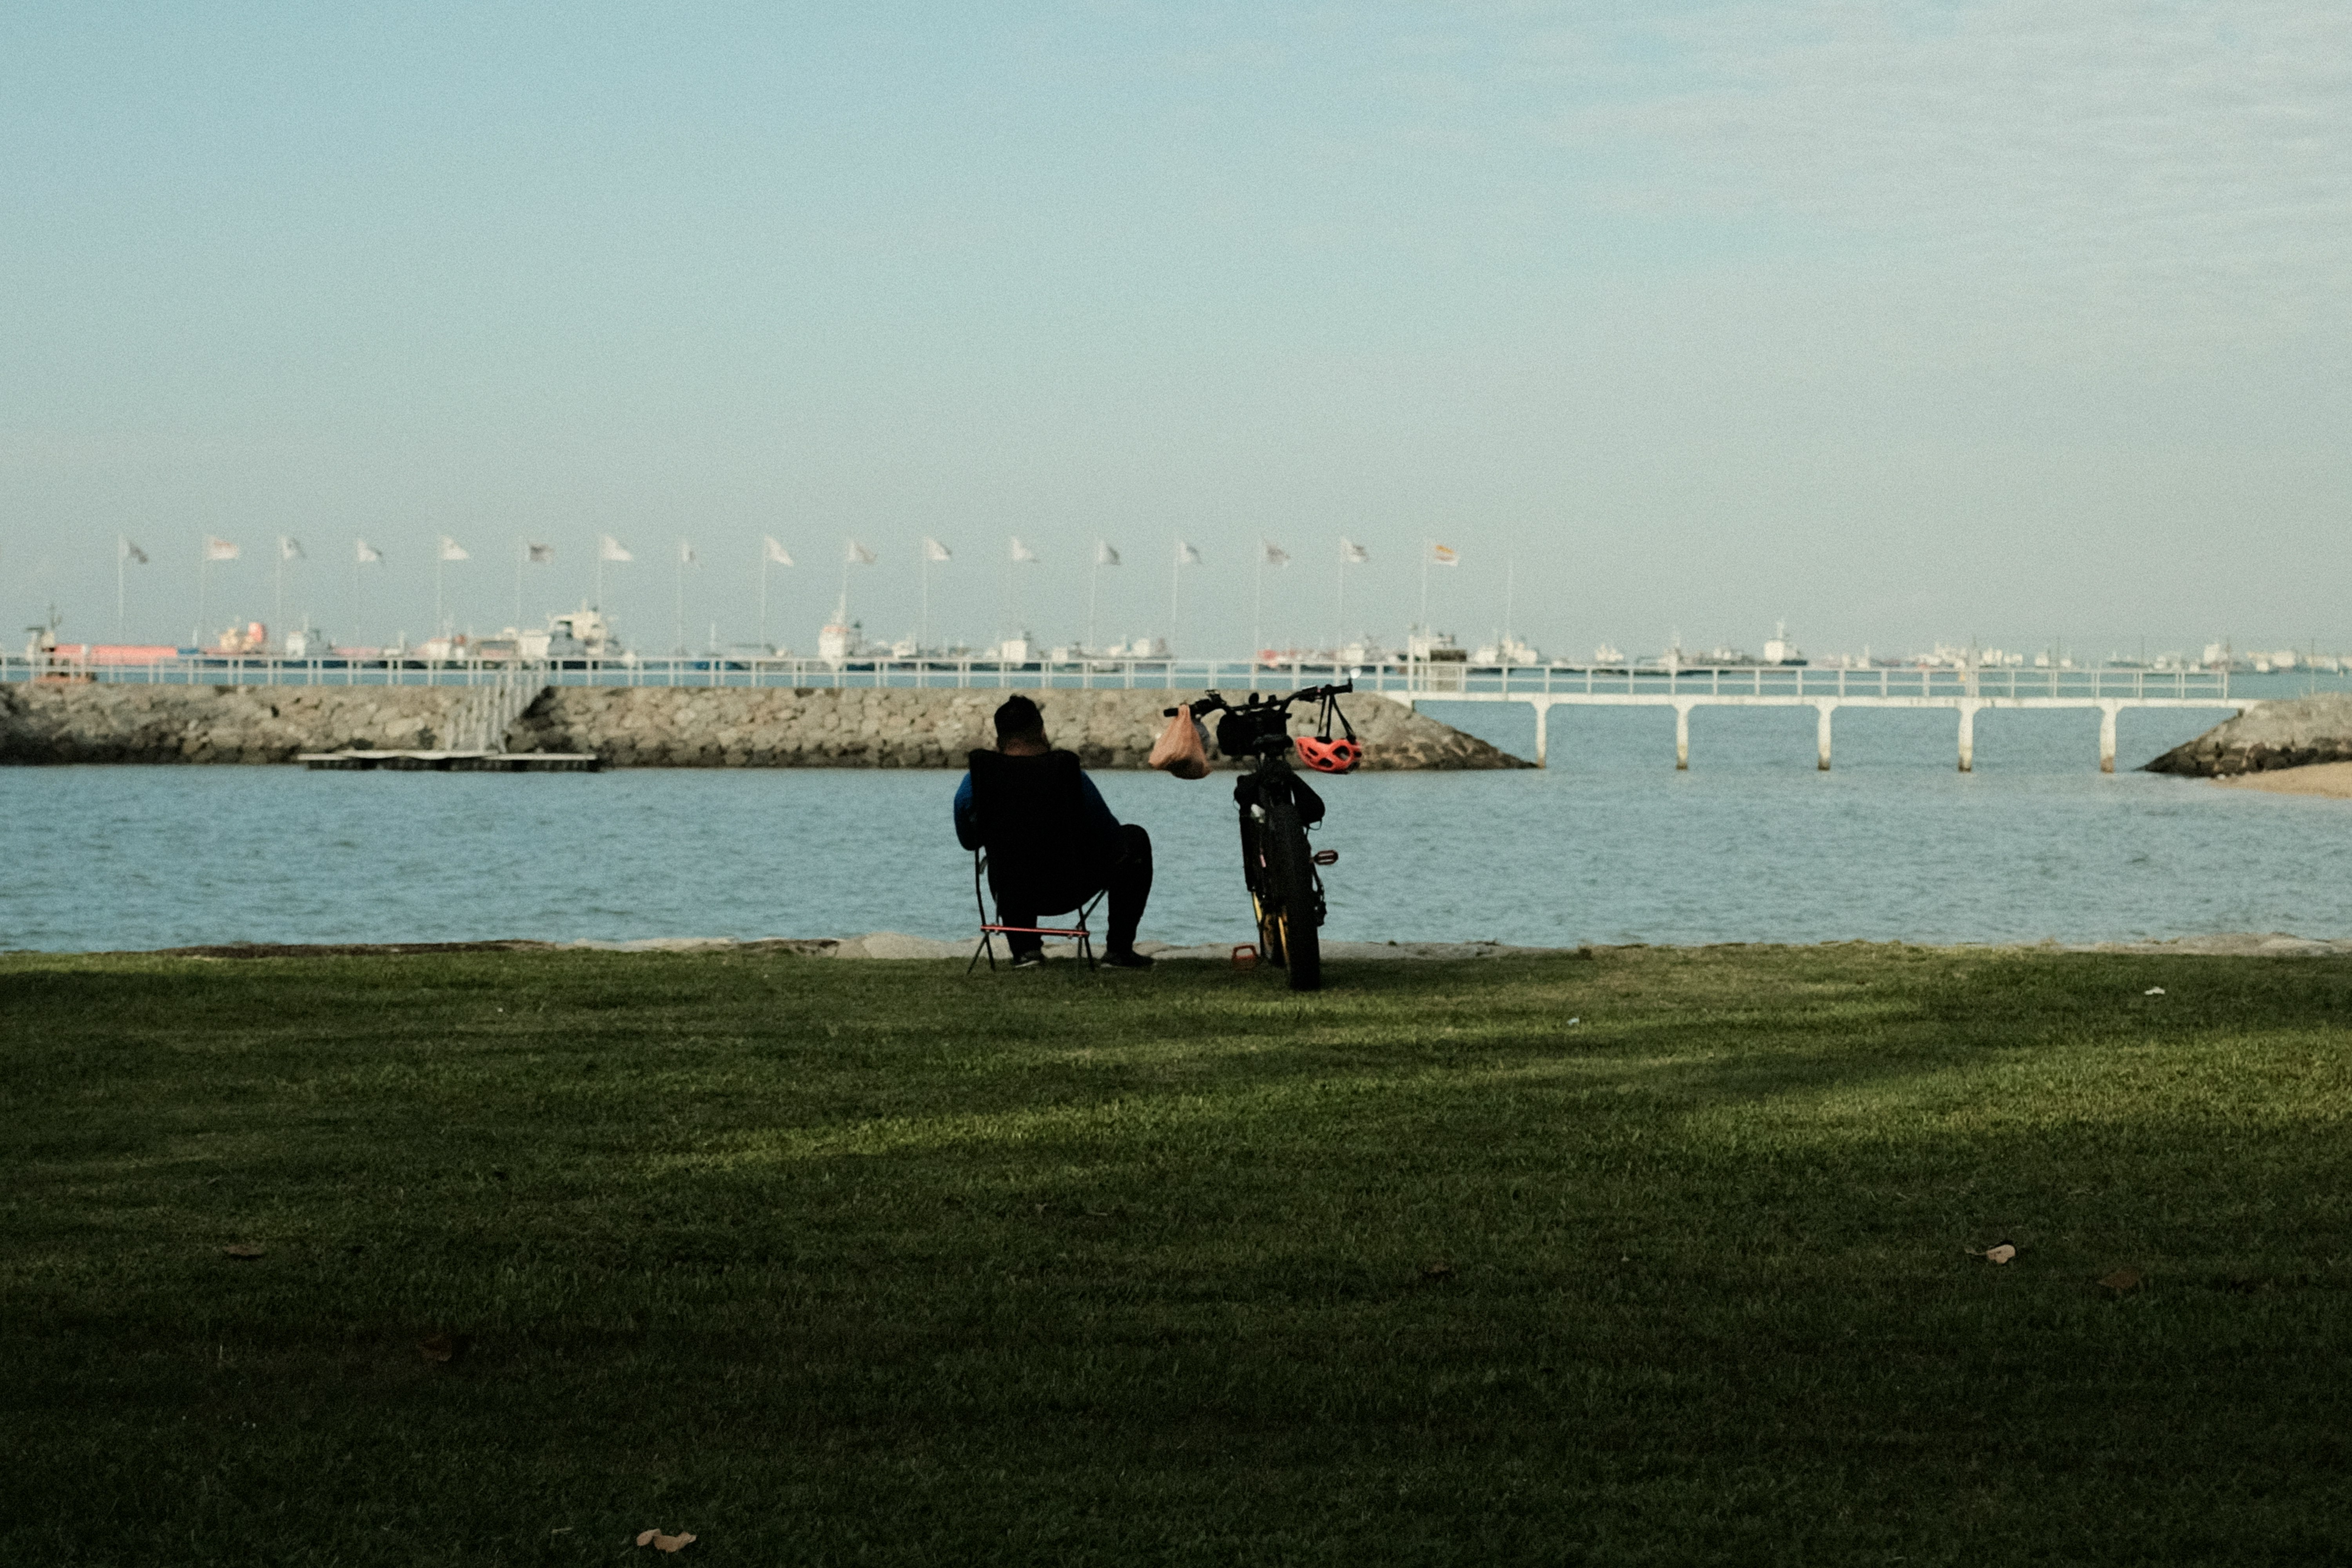 people walking on green grass field near body of water during daytime